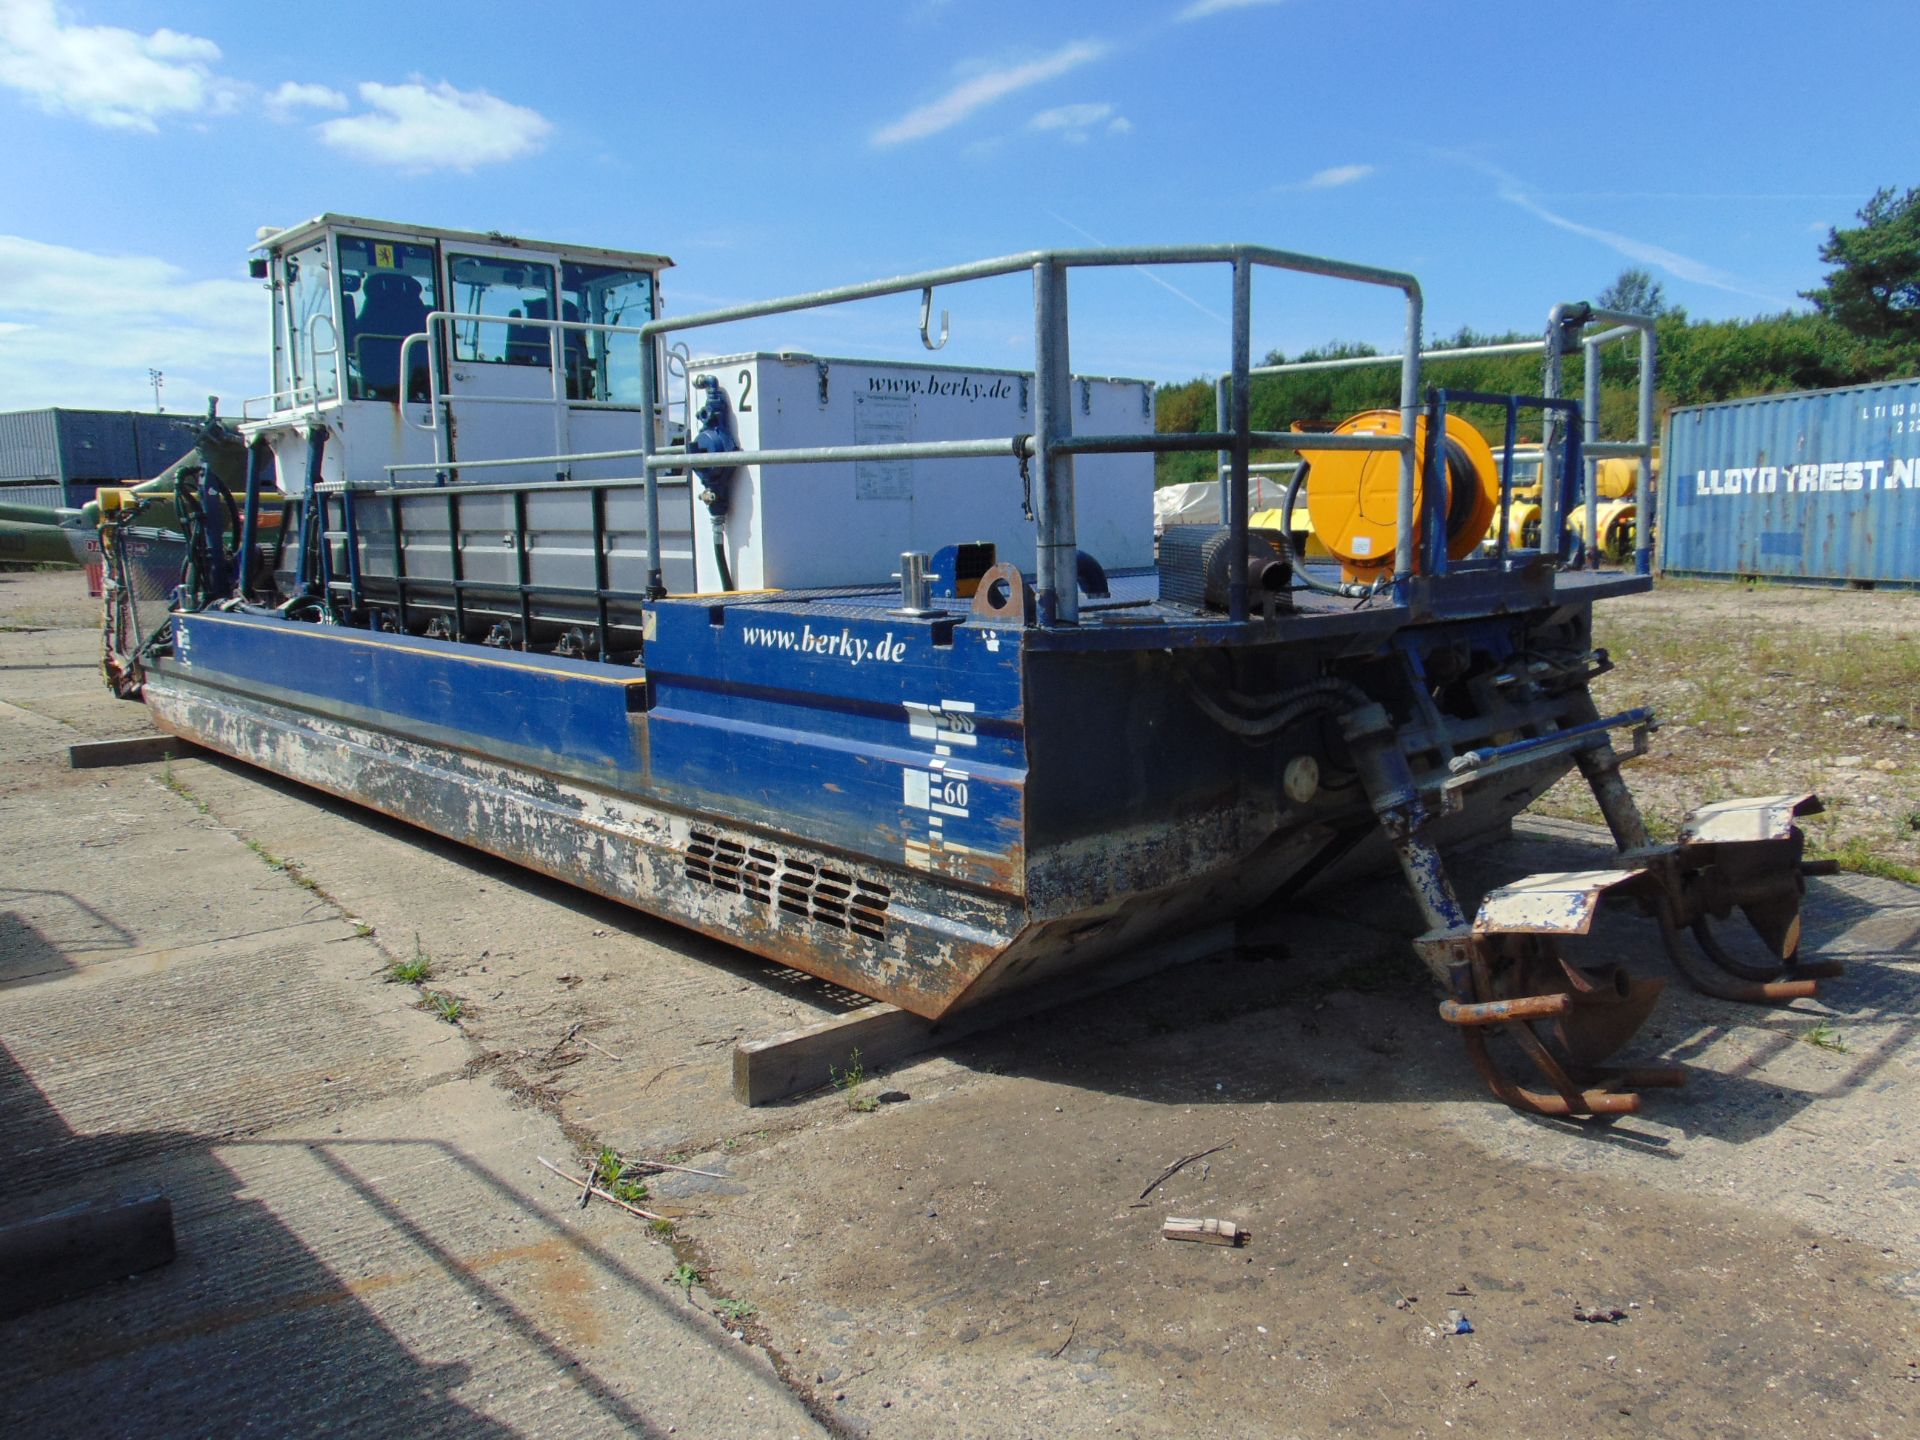 2012 Berky Type 6530 Aquatic Weed Harvester from the UK Environment Agency - Image 2 of 34